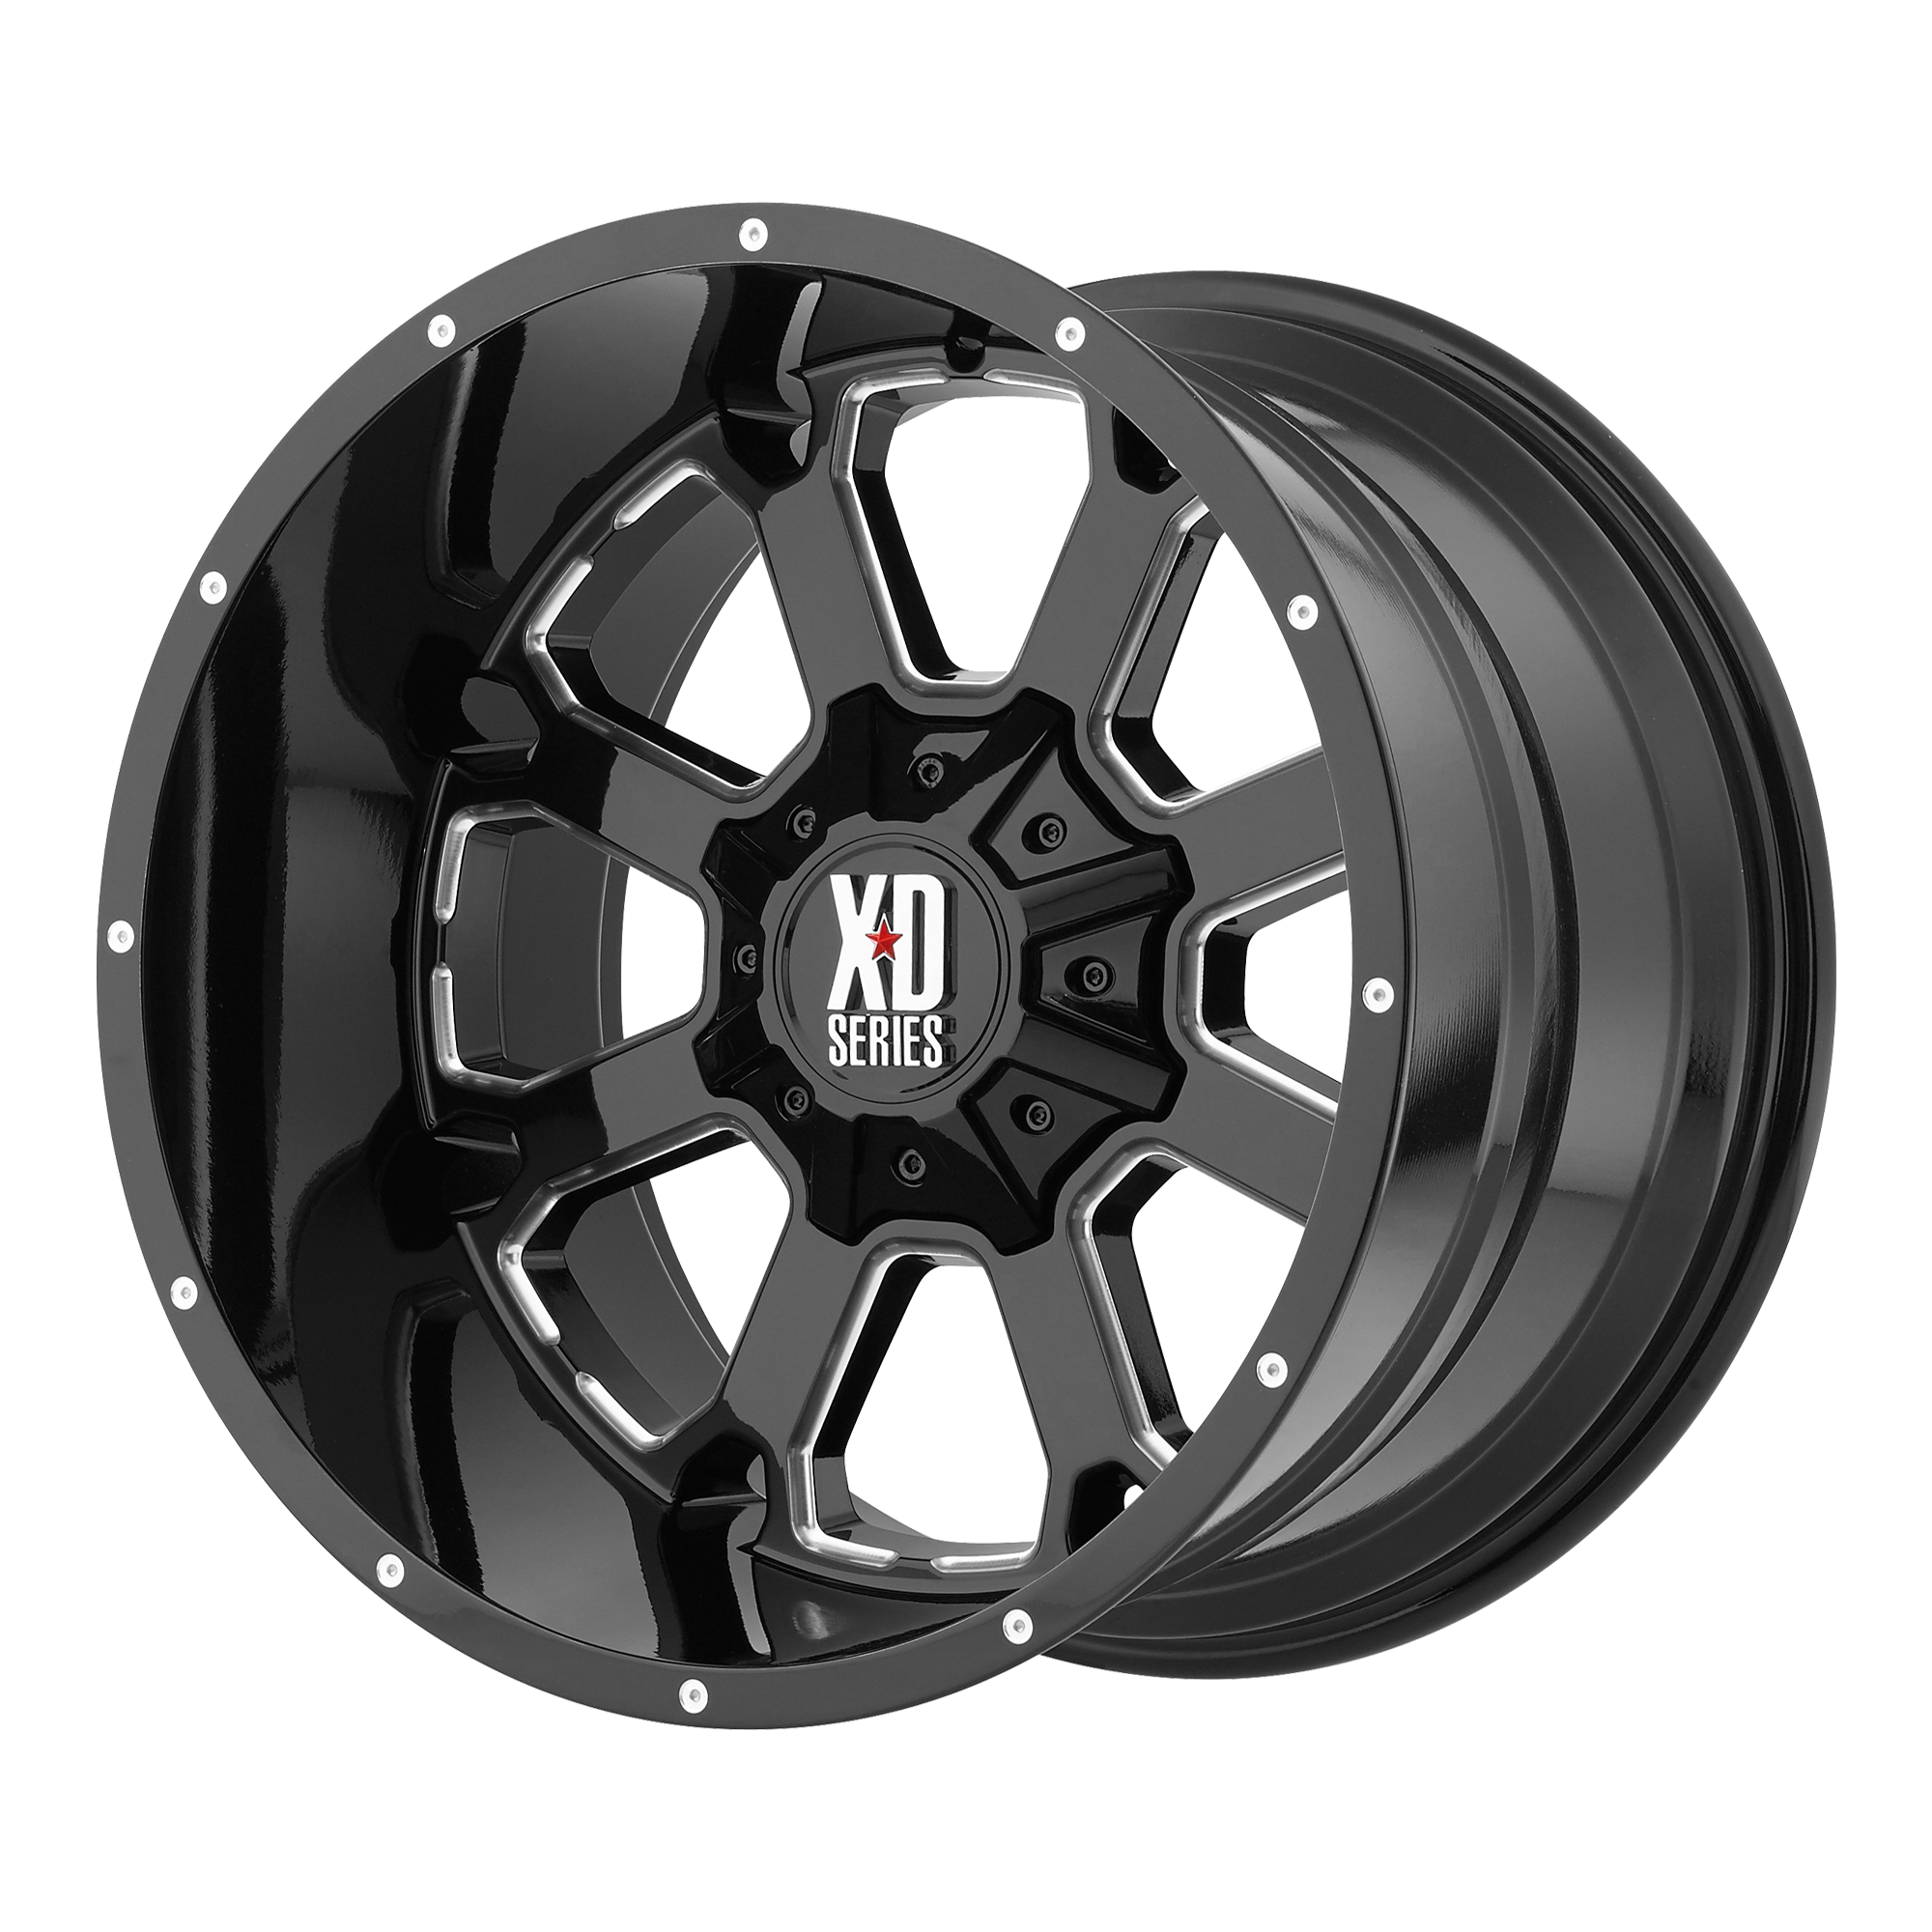 BUCK 25 20x10 5x127.00/5x135.00 GLOSS BLACK MILLED (-24 mm) - Tires and Engine Performance